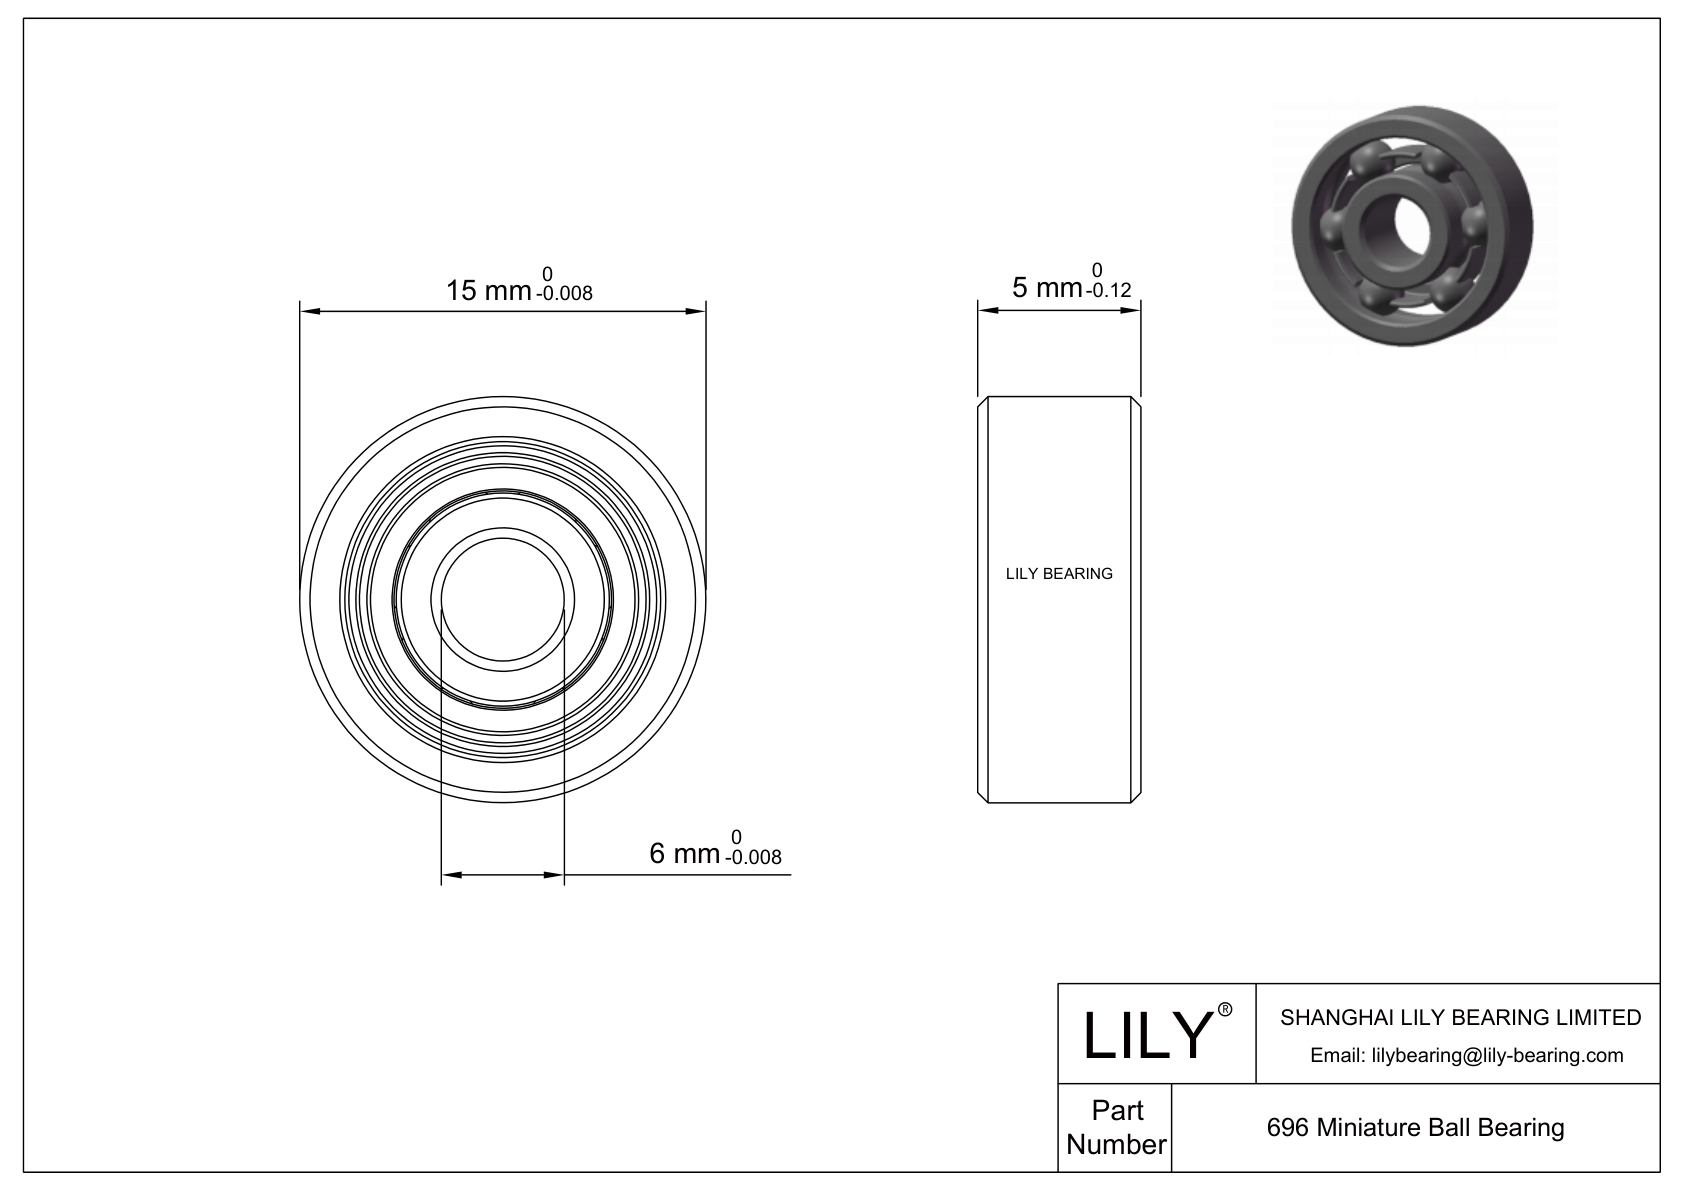 LILY-PU69620-5C1L12M6 Polyurethane Coated Bearing With Screw cad drawing